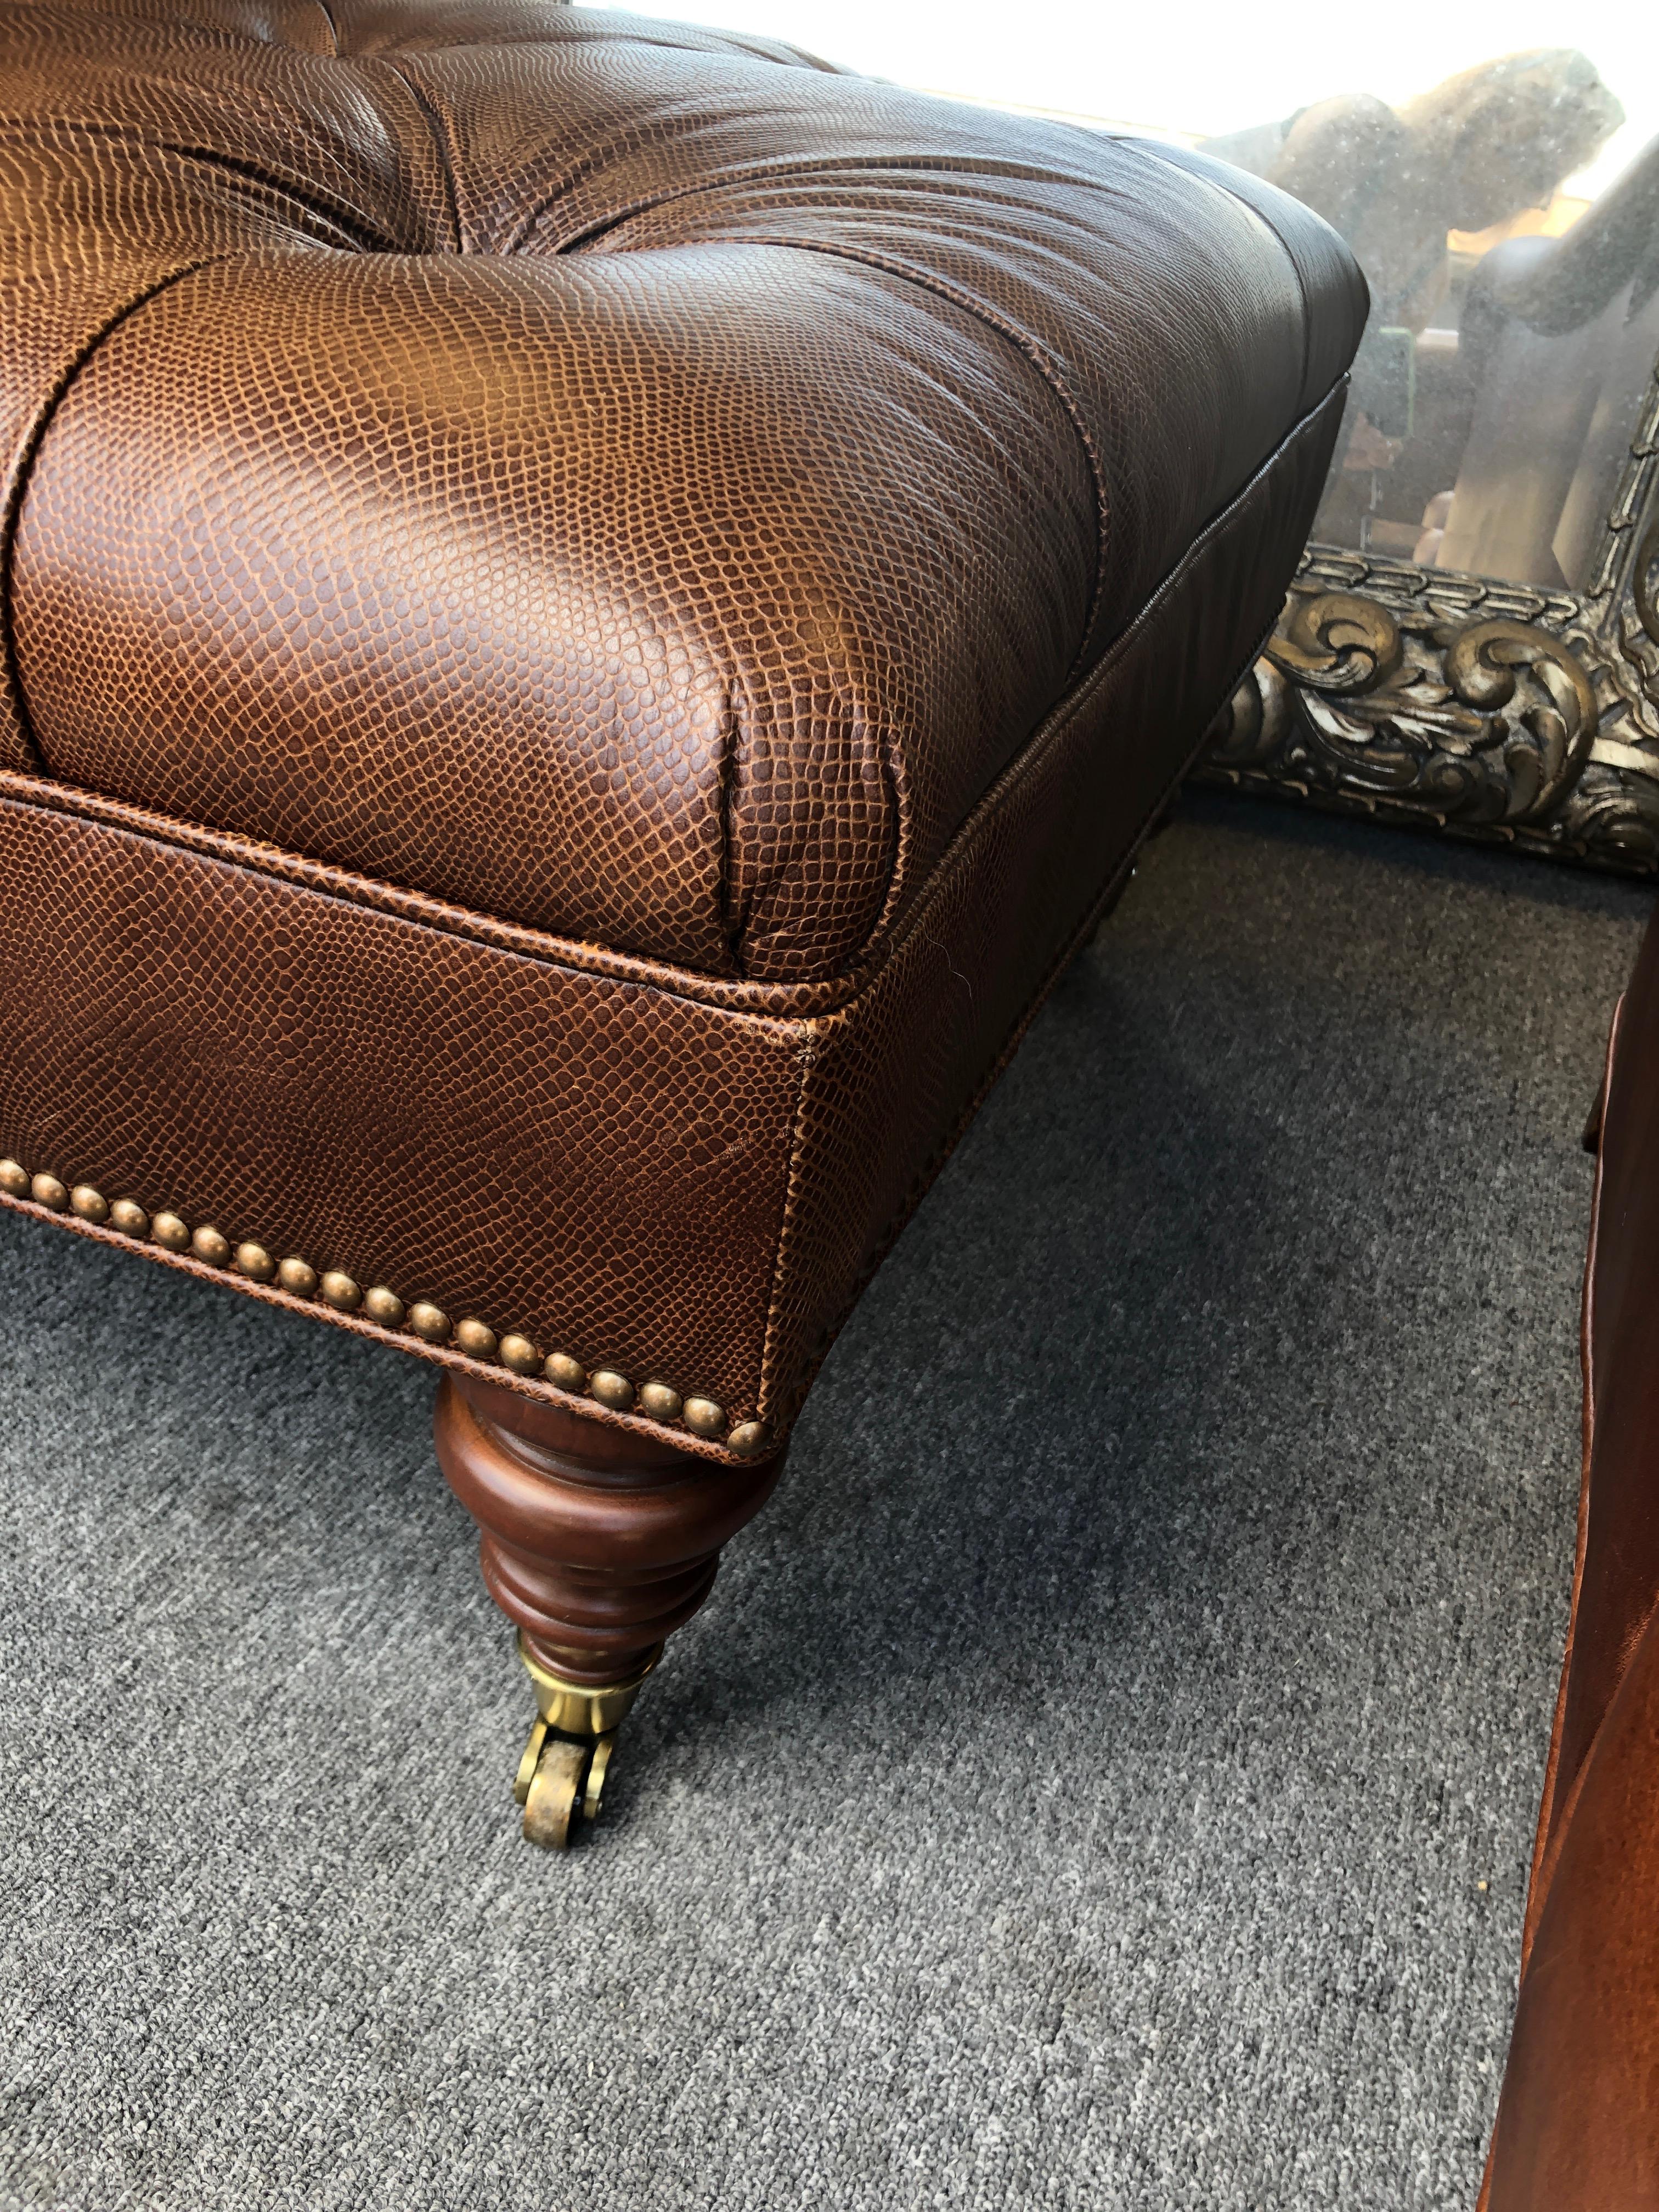 Great looking embossed leather tufted ottoman that looks like small pattern crocodile, having wooden turned feet on brass casters and nailhead detailing.